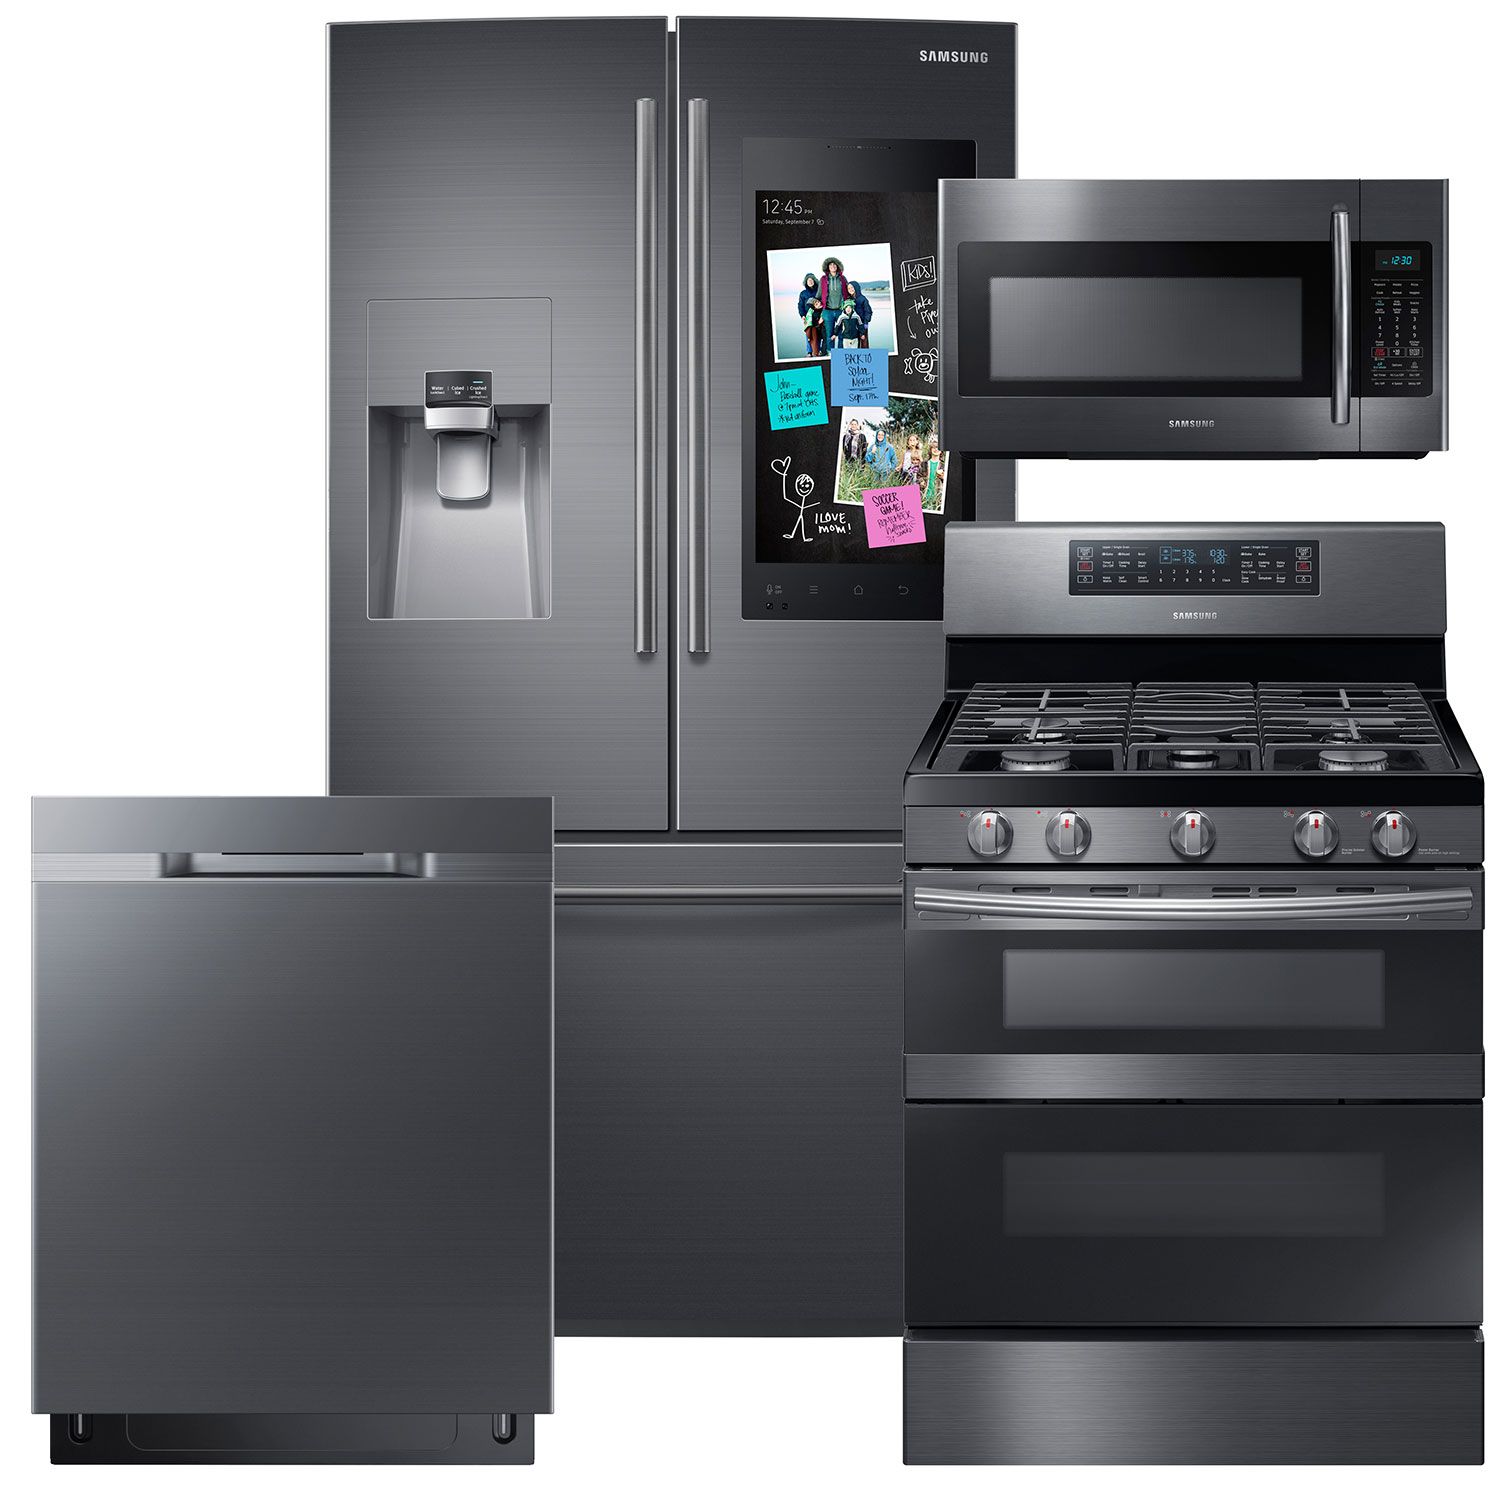 SAMSUNG Family Hub Refrigerator, Flex Duo Gas Range, Microwave, and Dishwasher Package in Black Stainless Steel